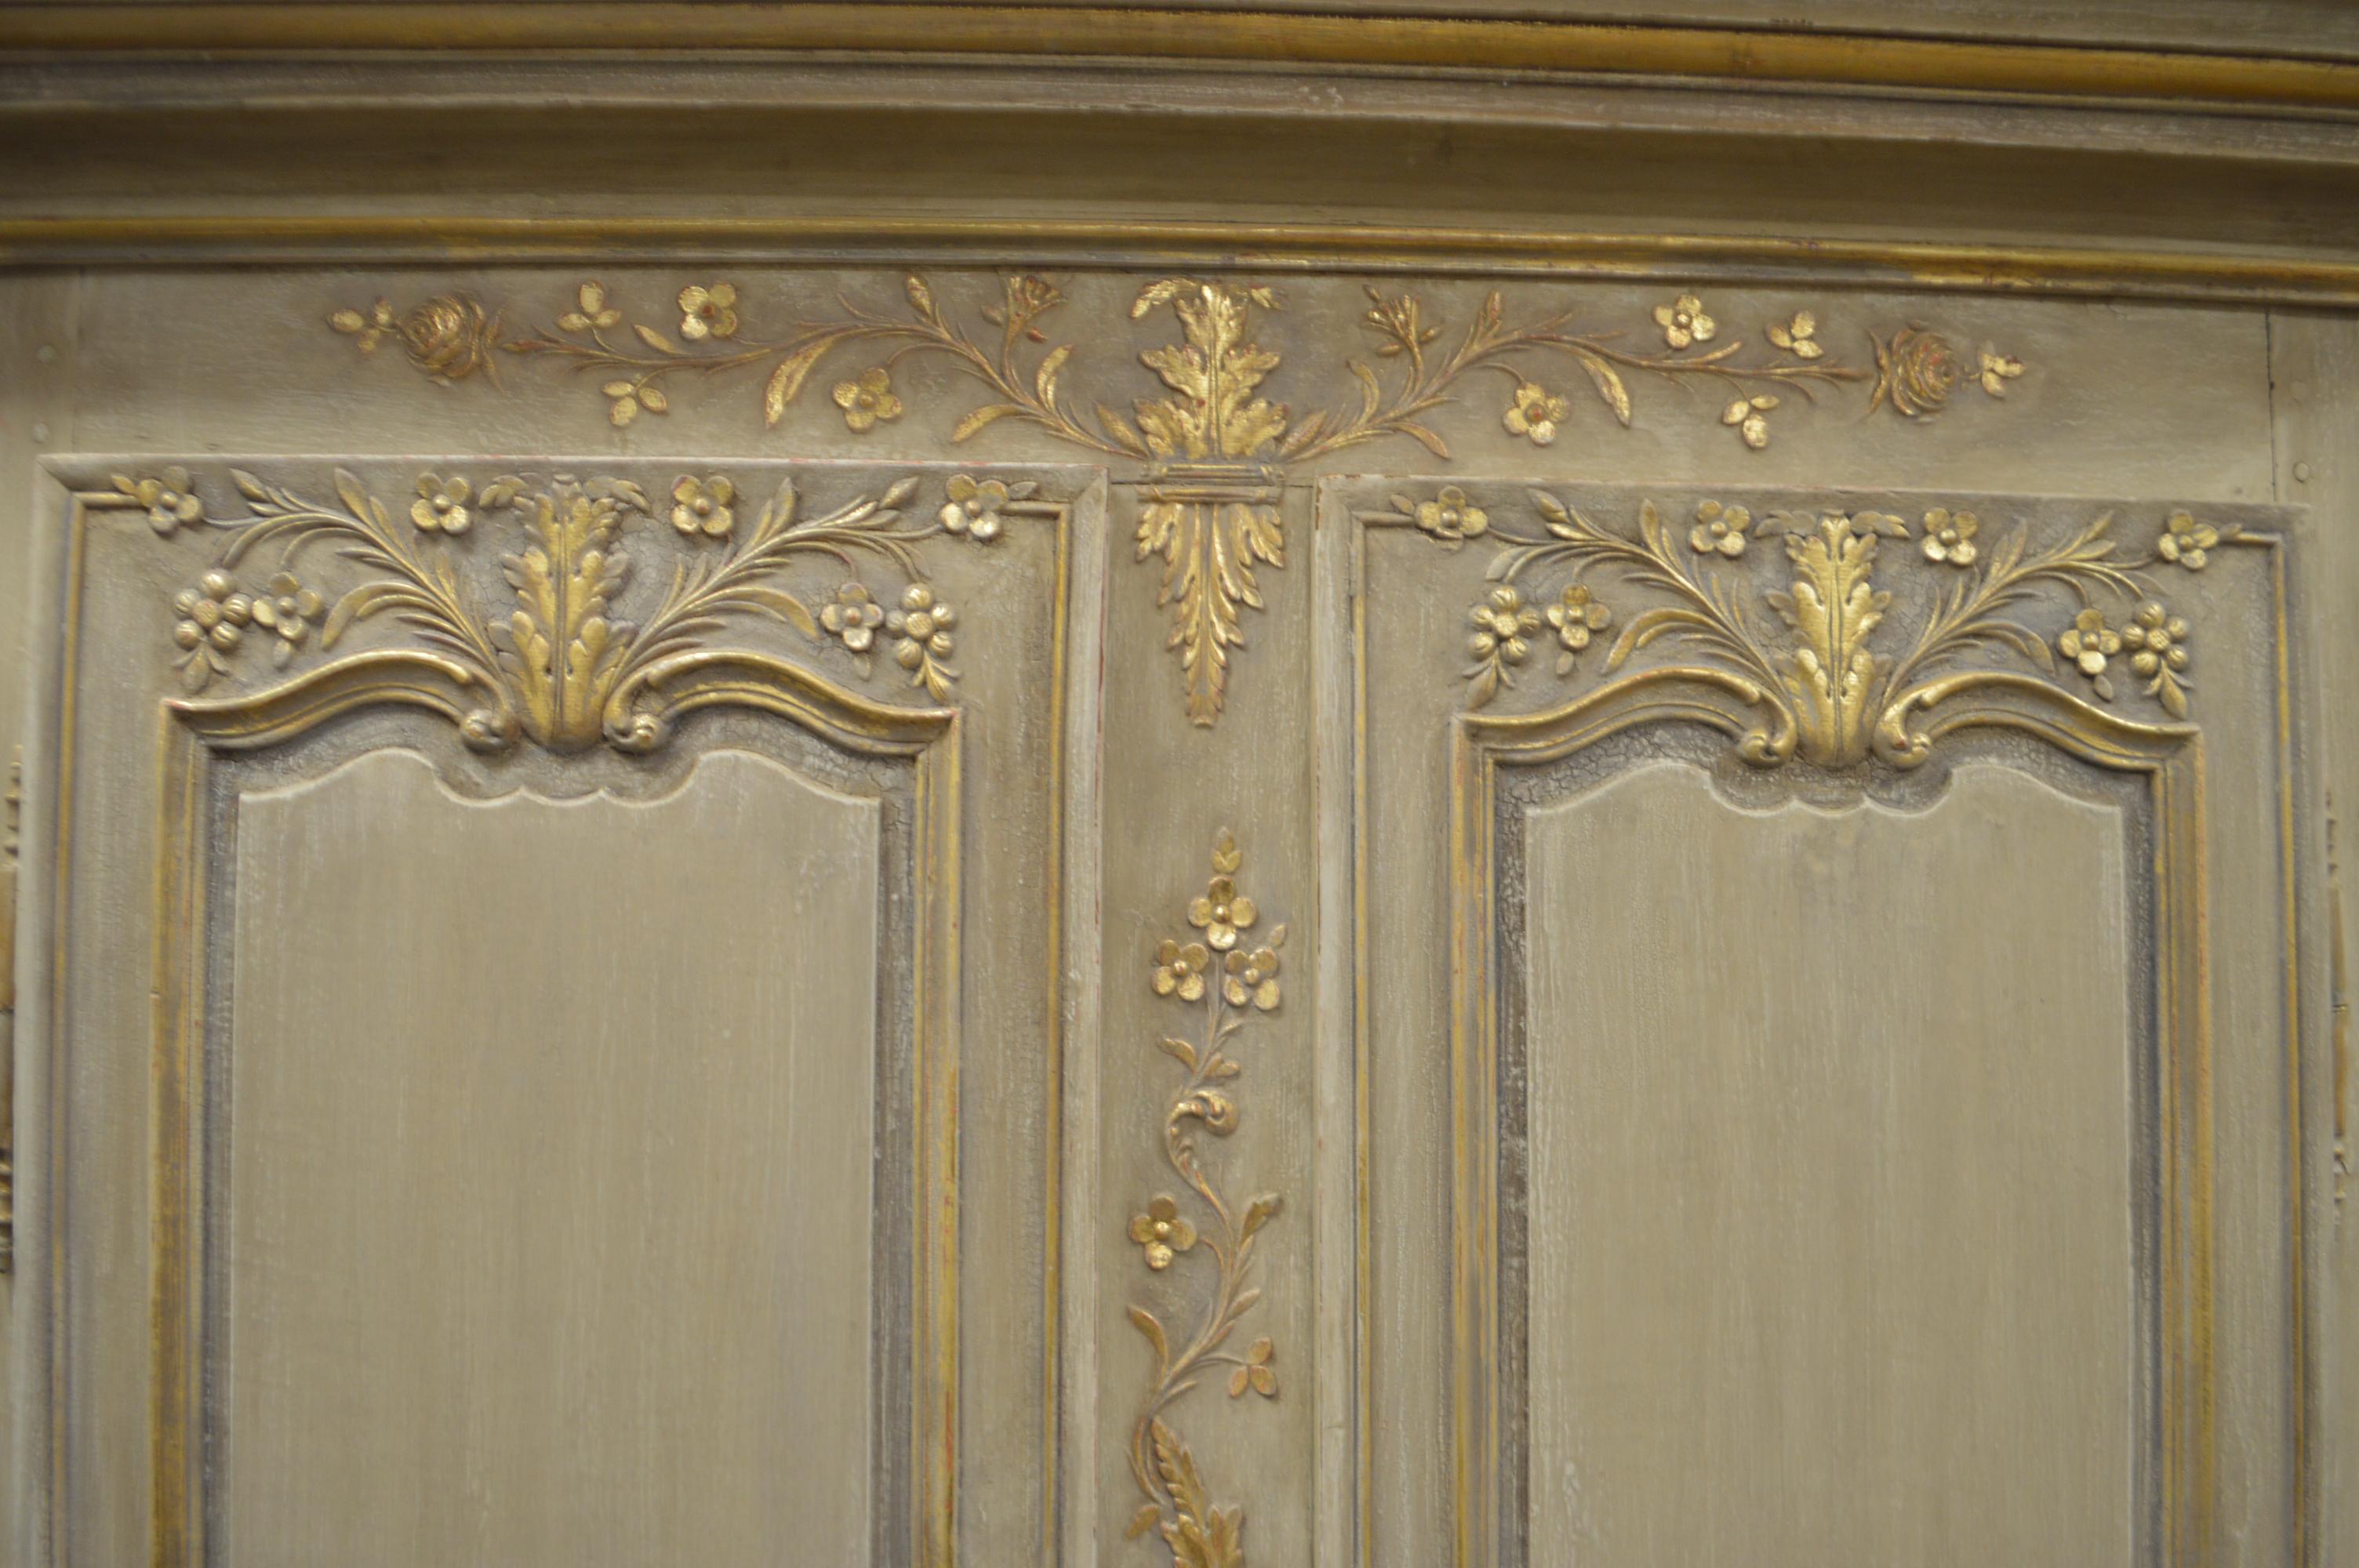 Louis XV Style Highly Decorative Painted Armoire with Gilt Details, 5 Shelves (Französisch)